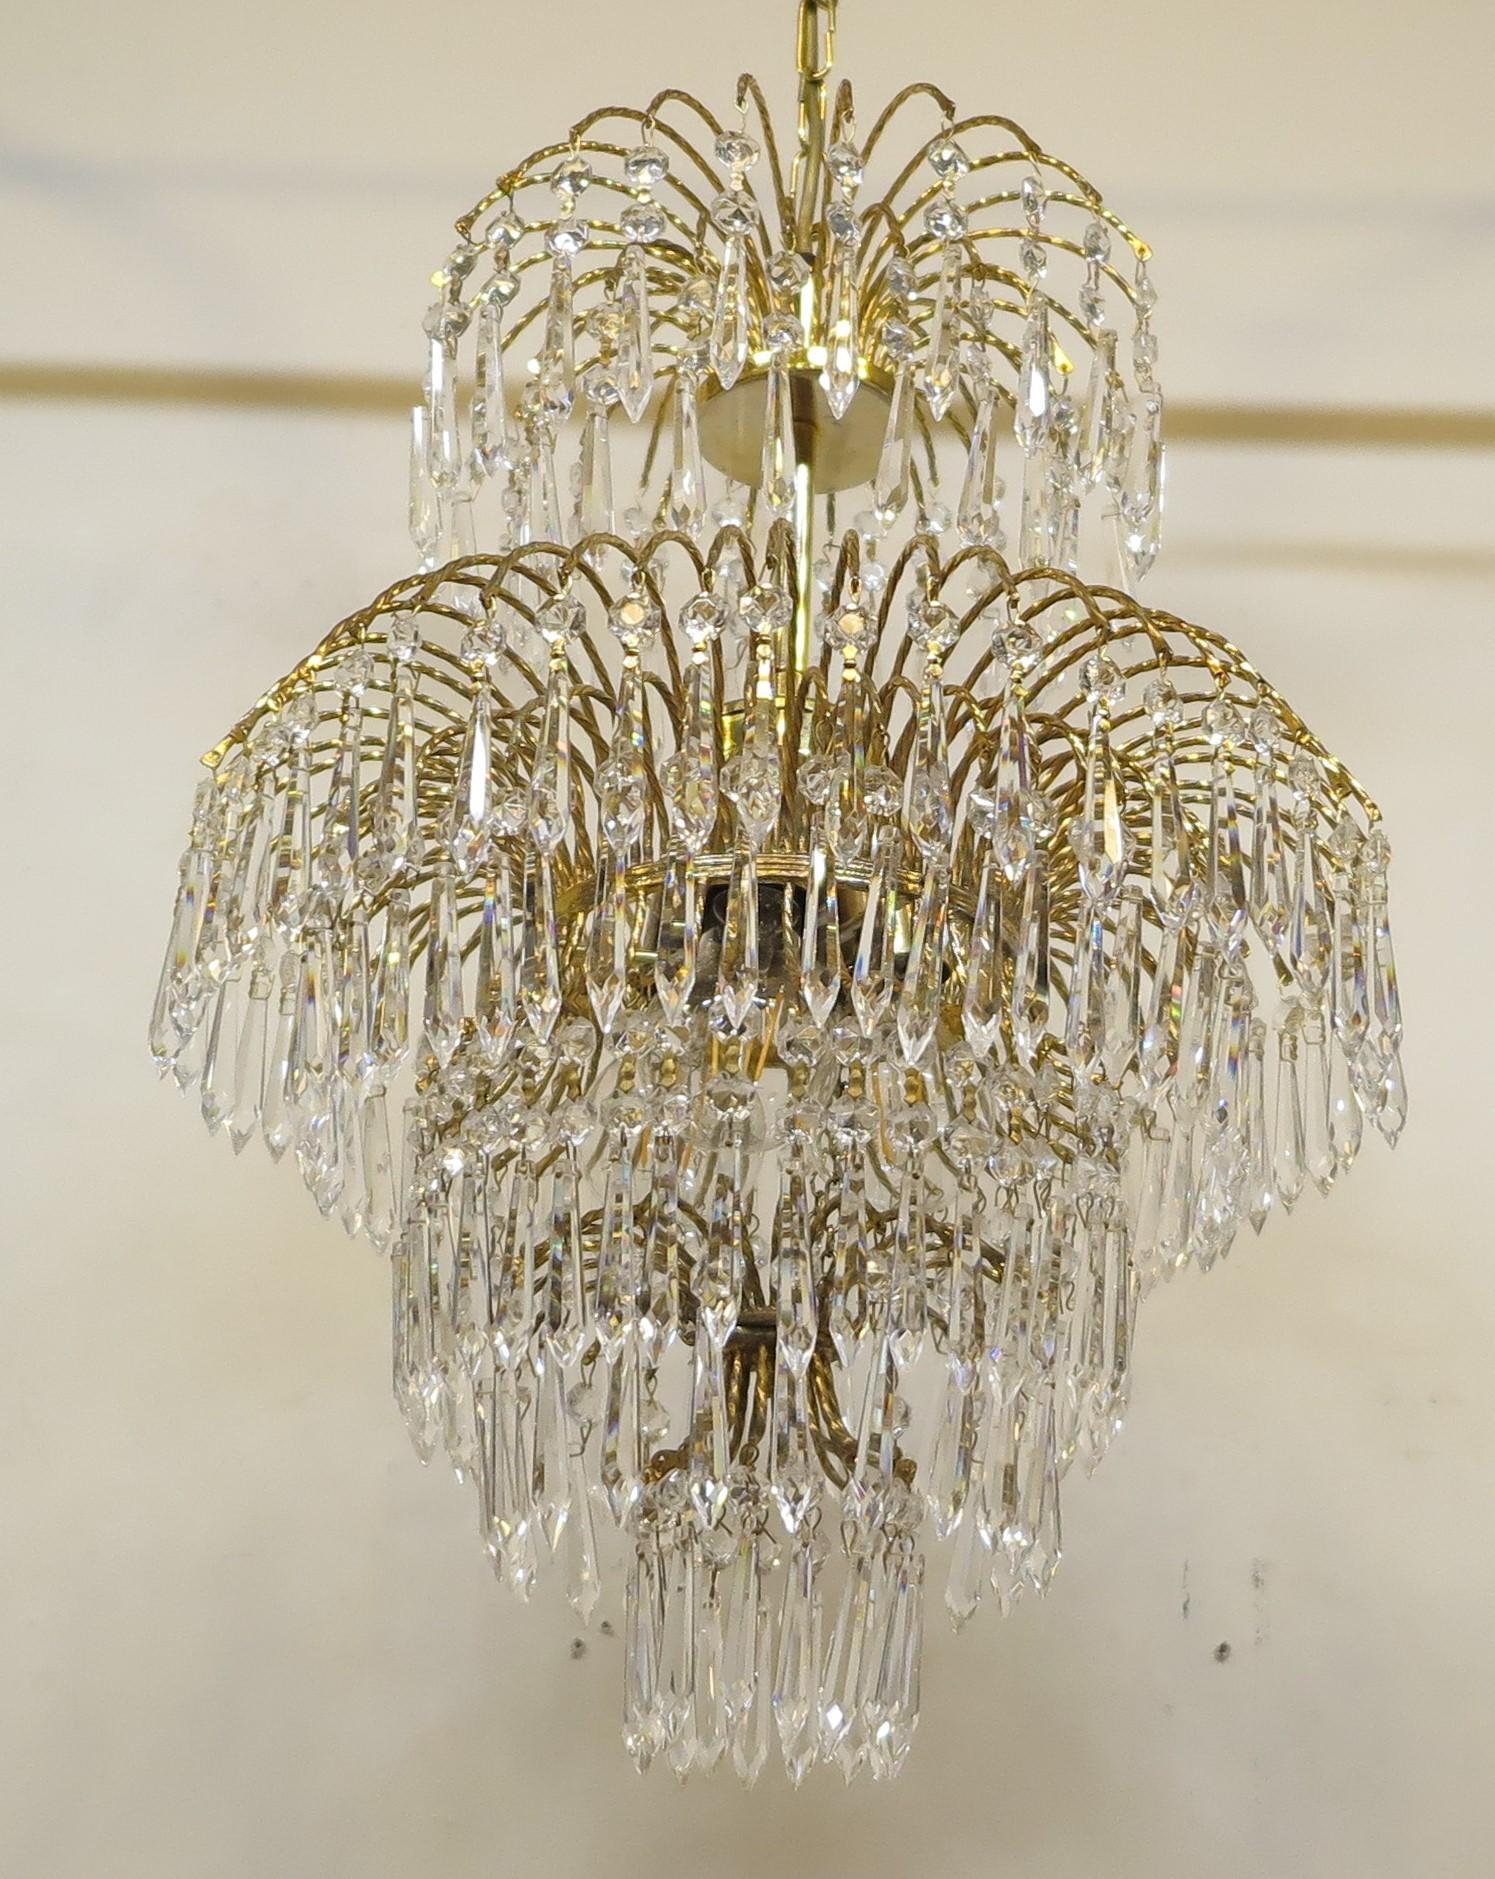 French Mid-Century Hollywood Regency waterfall chandelier with spectacular crystal prisms throughout. Features brass frame with steel gilded hangers with multiple cascading tiers floating drop cut crystals on brass fittings with crystal beads. The